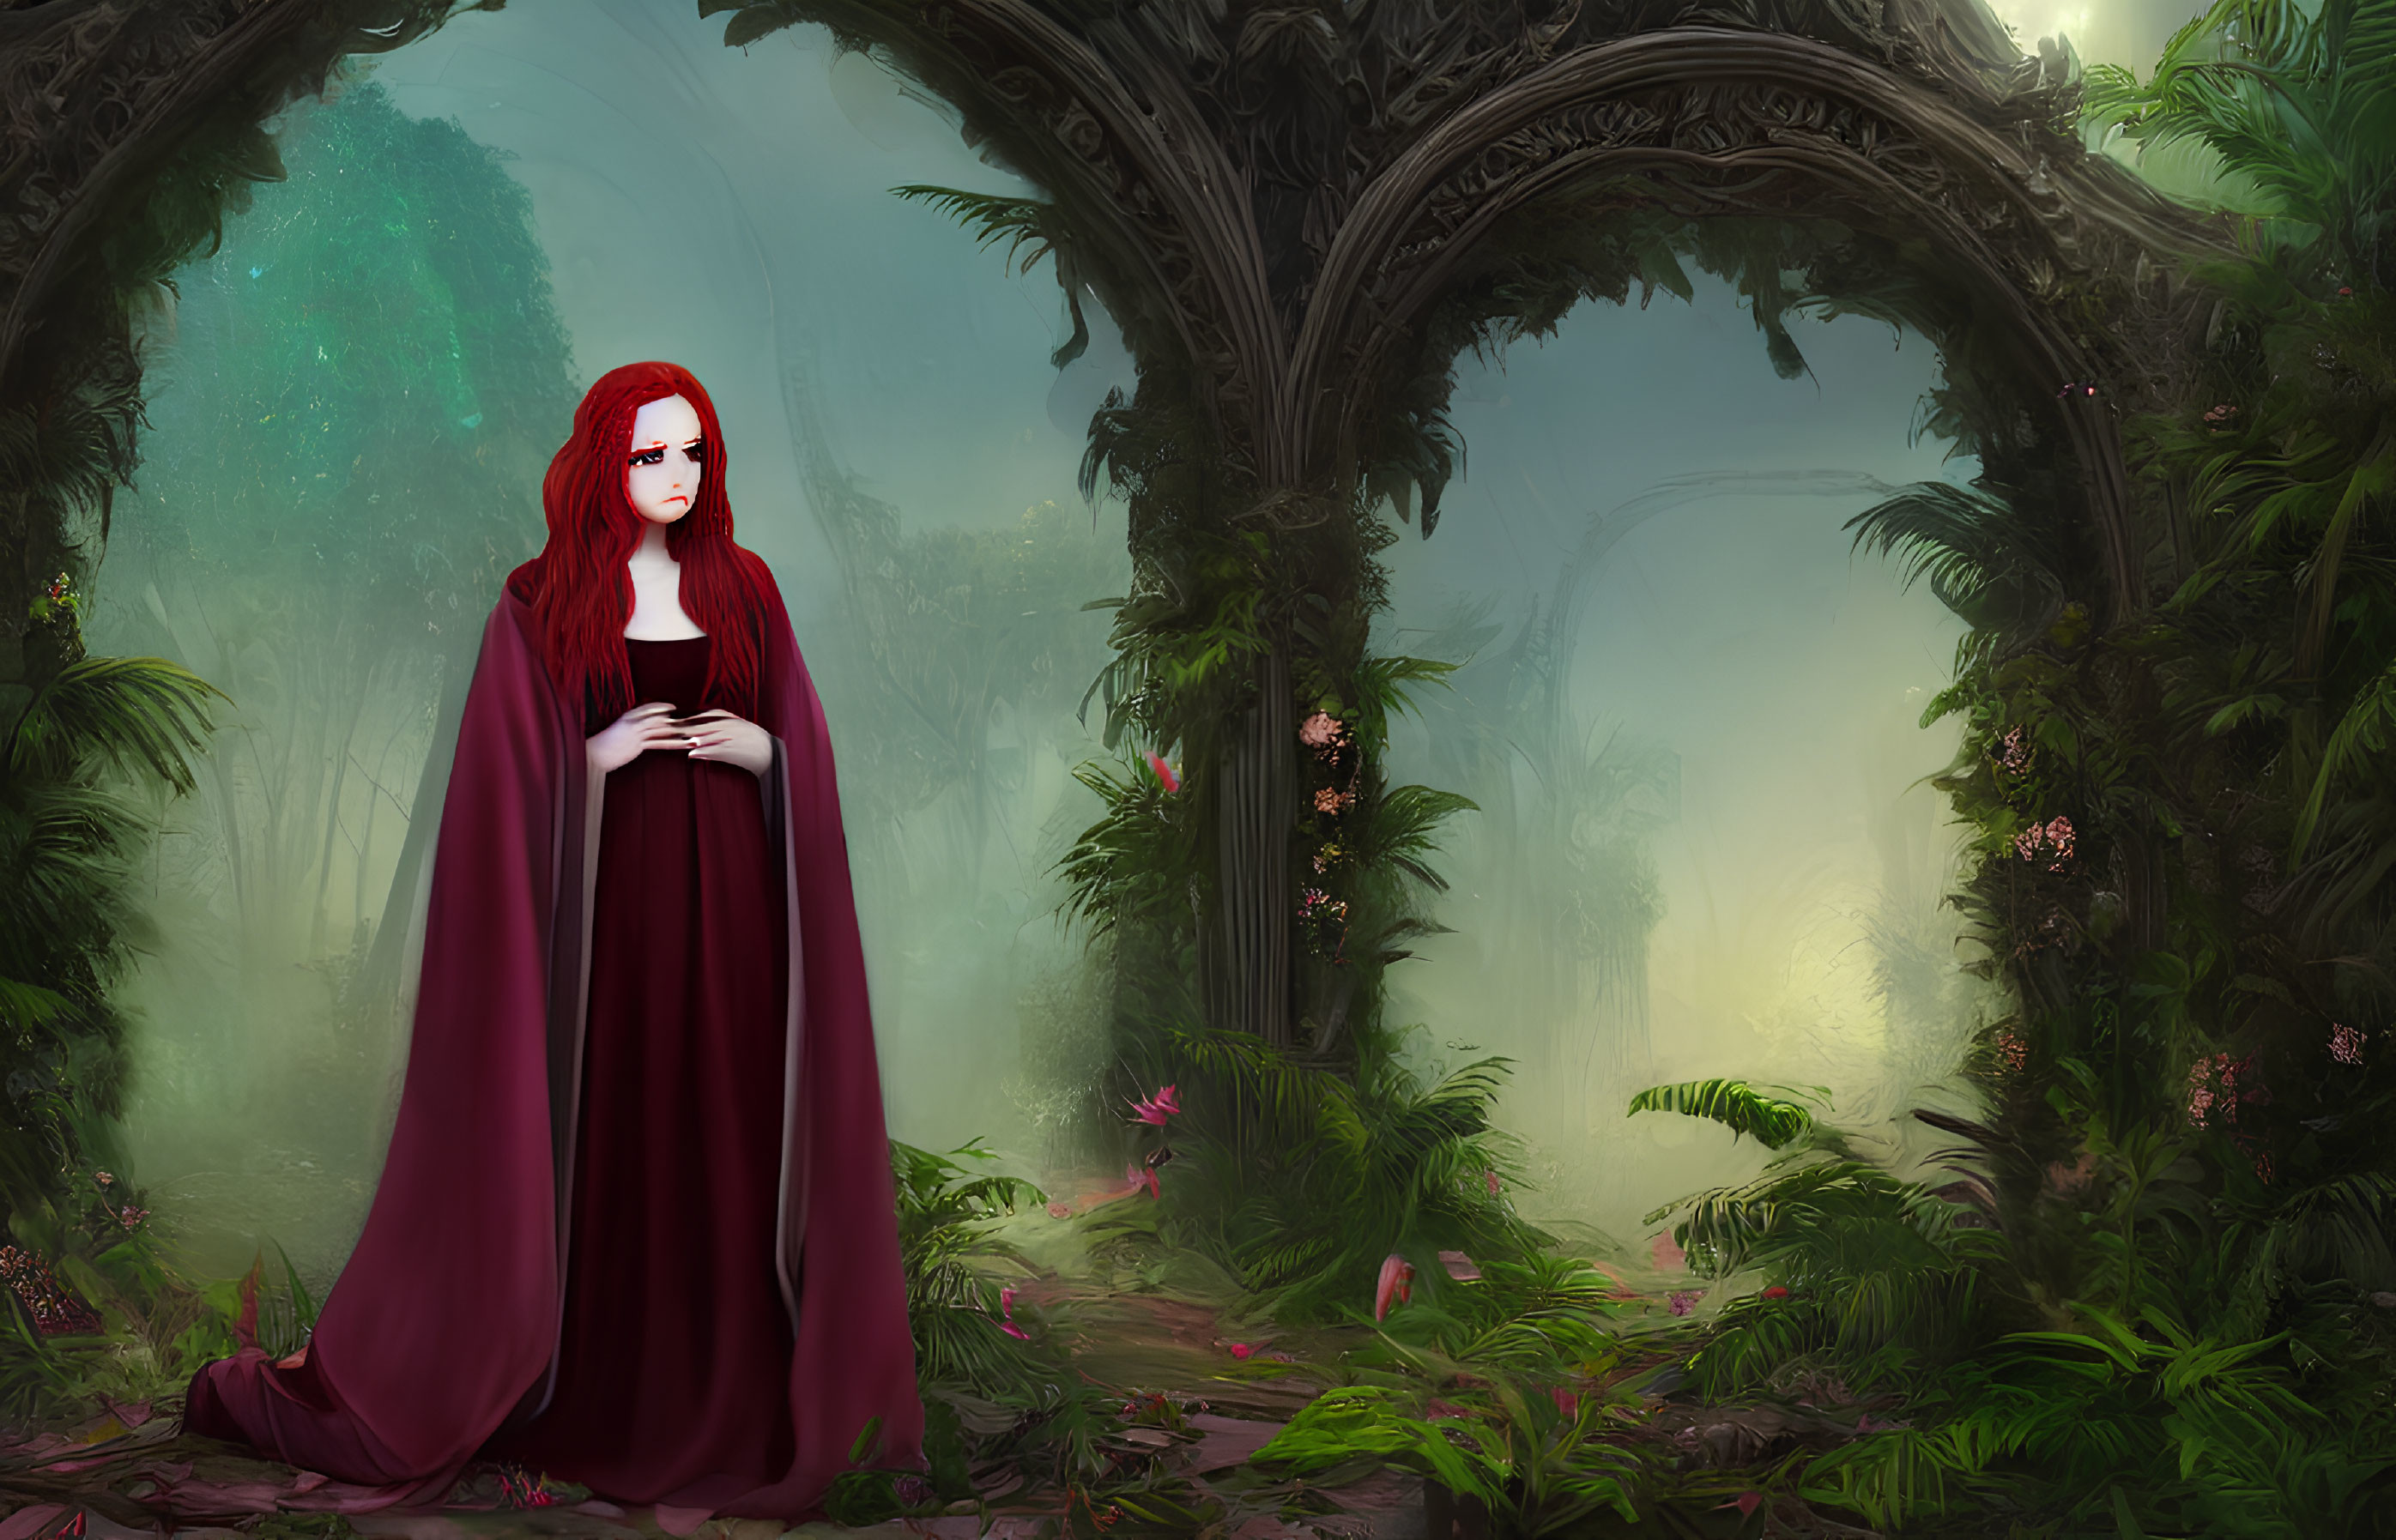 Red-haired woman in burgundy cloak in misty garden with archways.